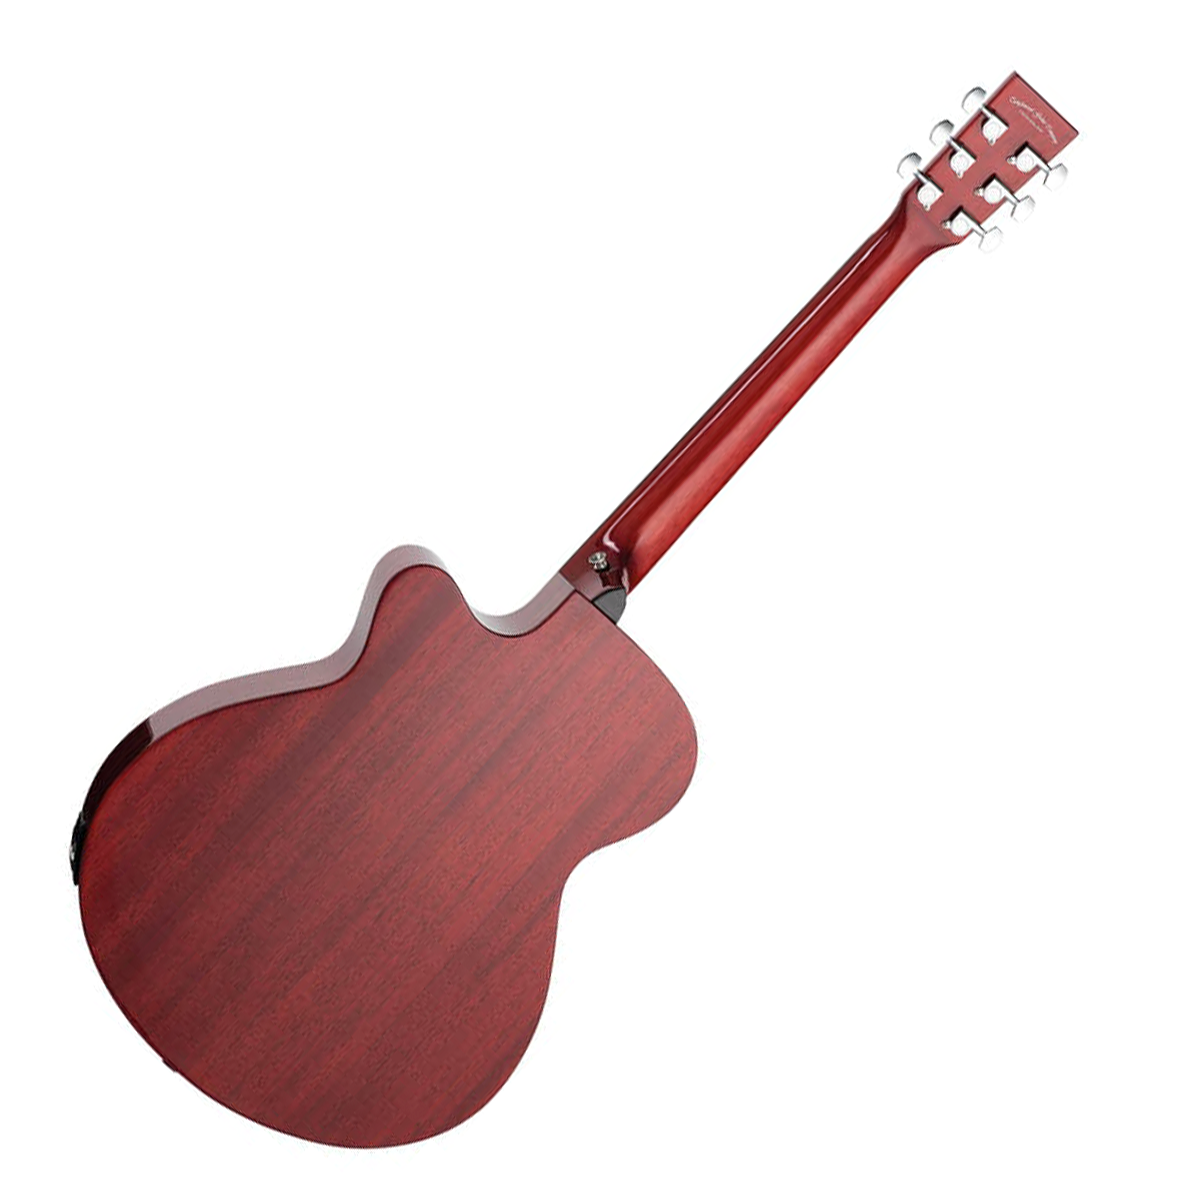 Tanglewood DBT-SFCE-TRG Super Folk Acoustic Guitar - Red Gloss